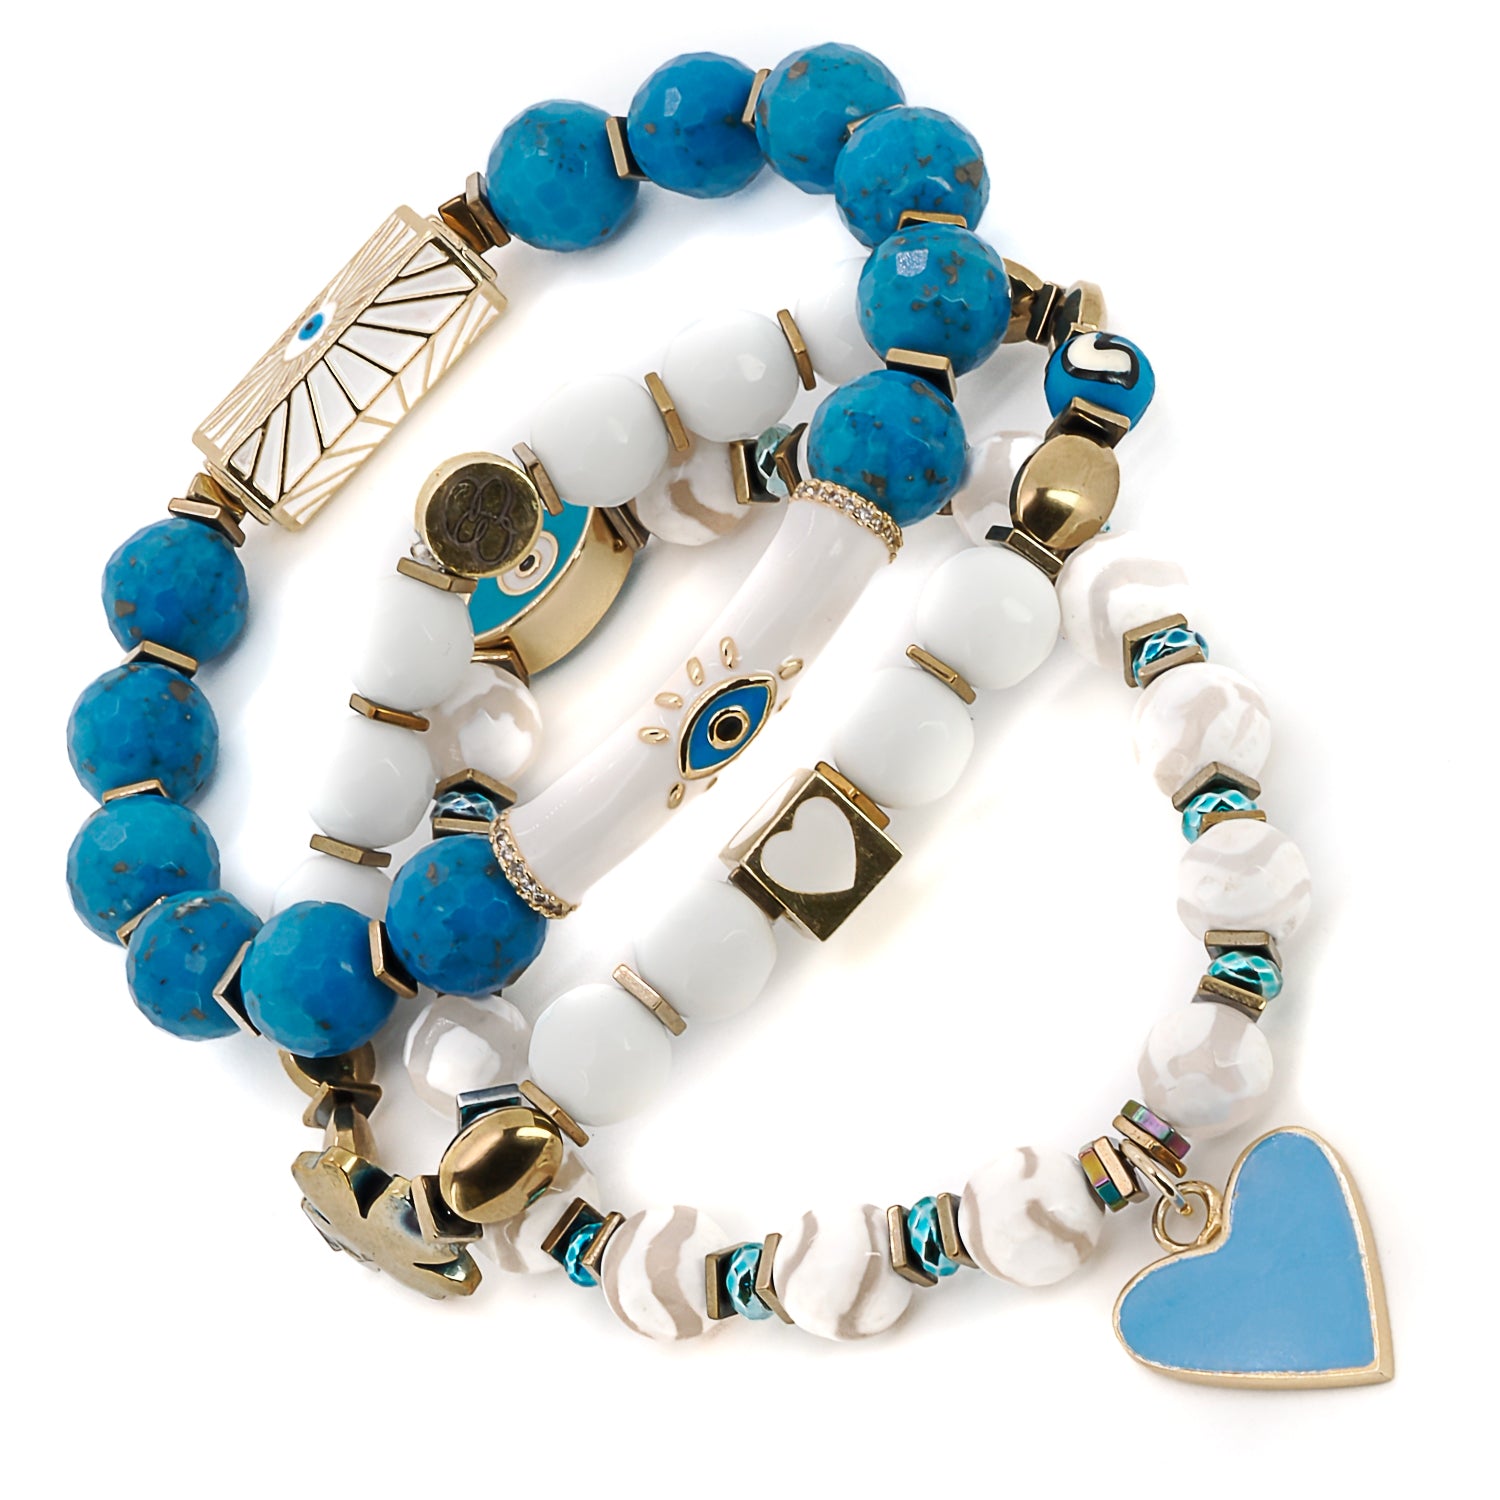 Wear the Power Of Love Trio Bracelet Set as a reminder of the transformative power of love and the protective energy it brings.